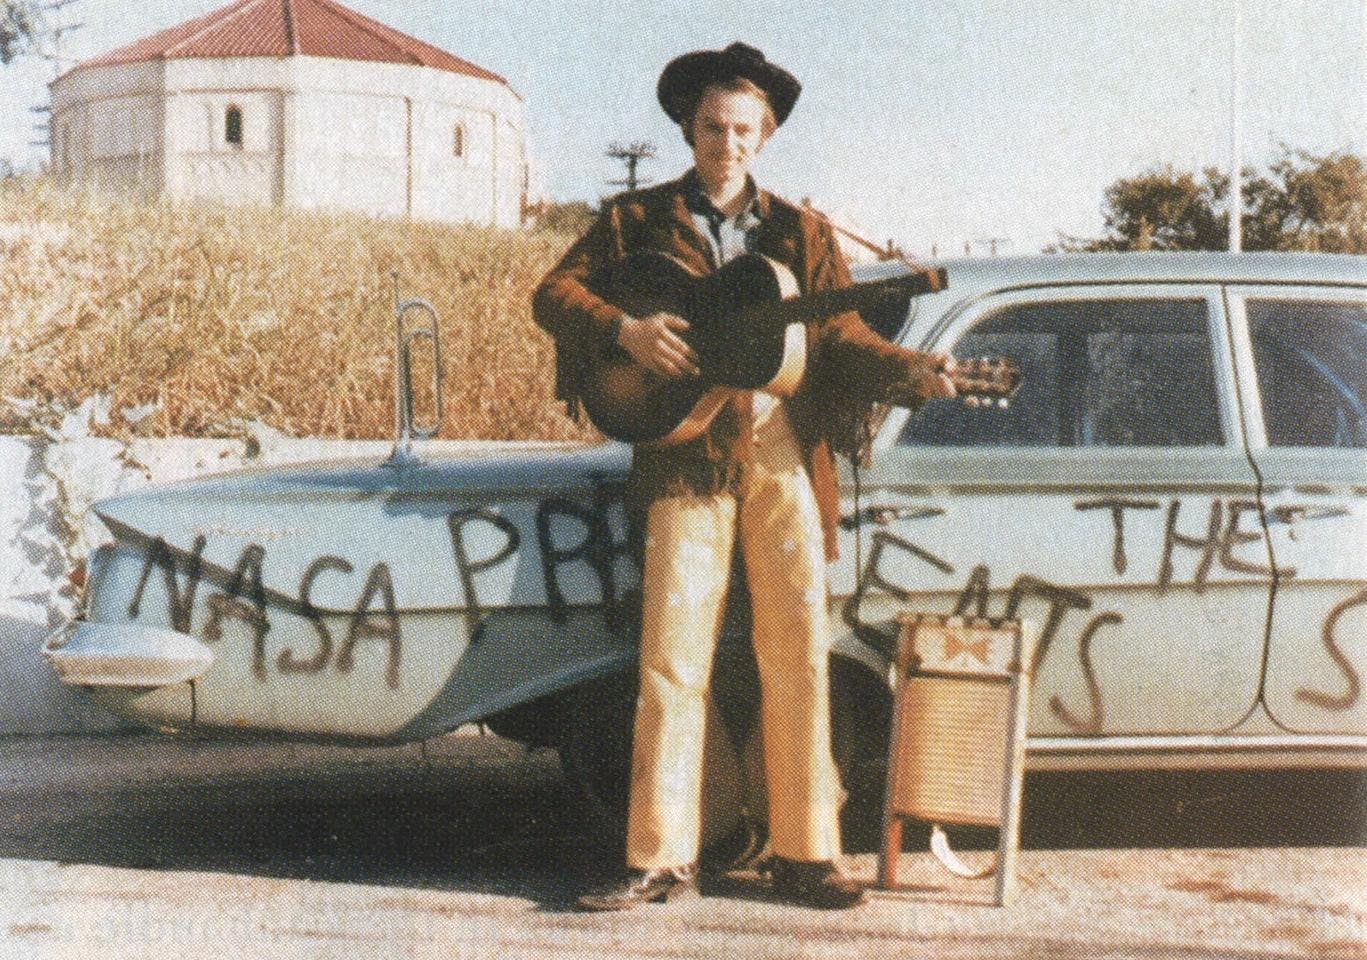 Mid-sixties: Norman Odam, the Legendary Stardust Cowboy, in front of his car.